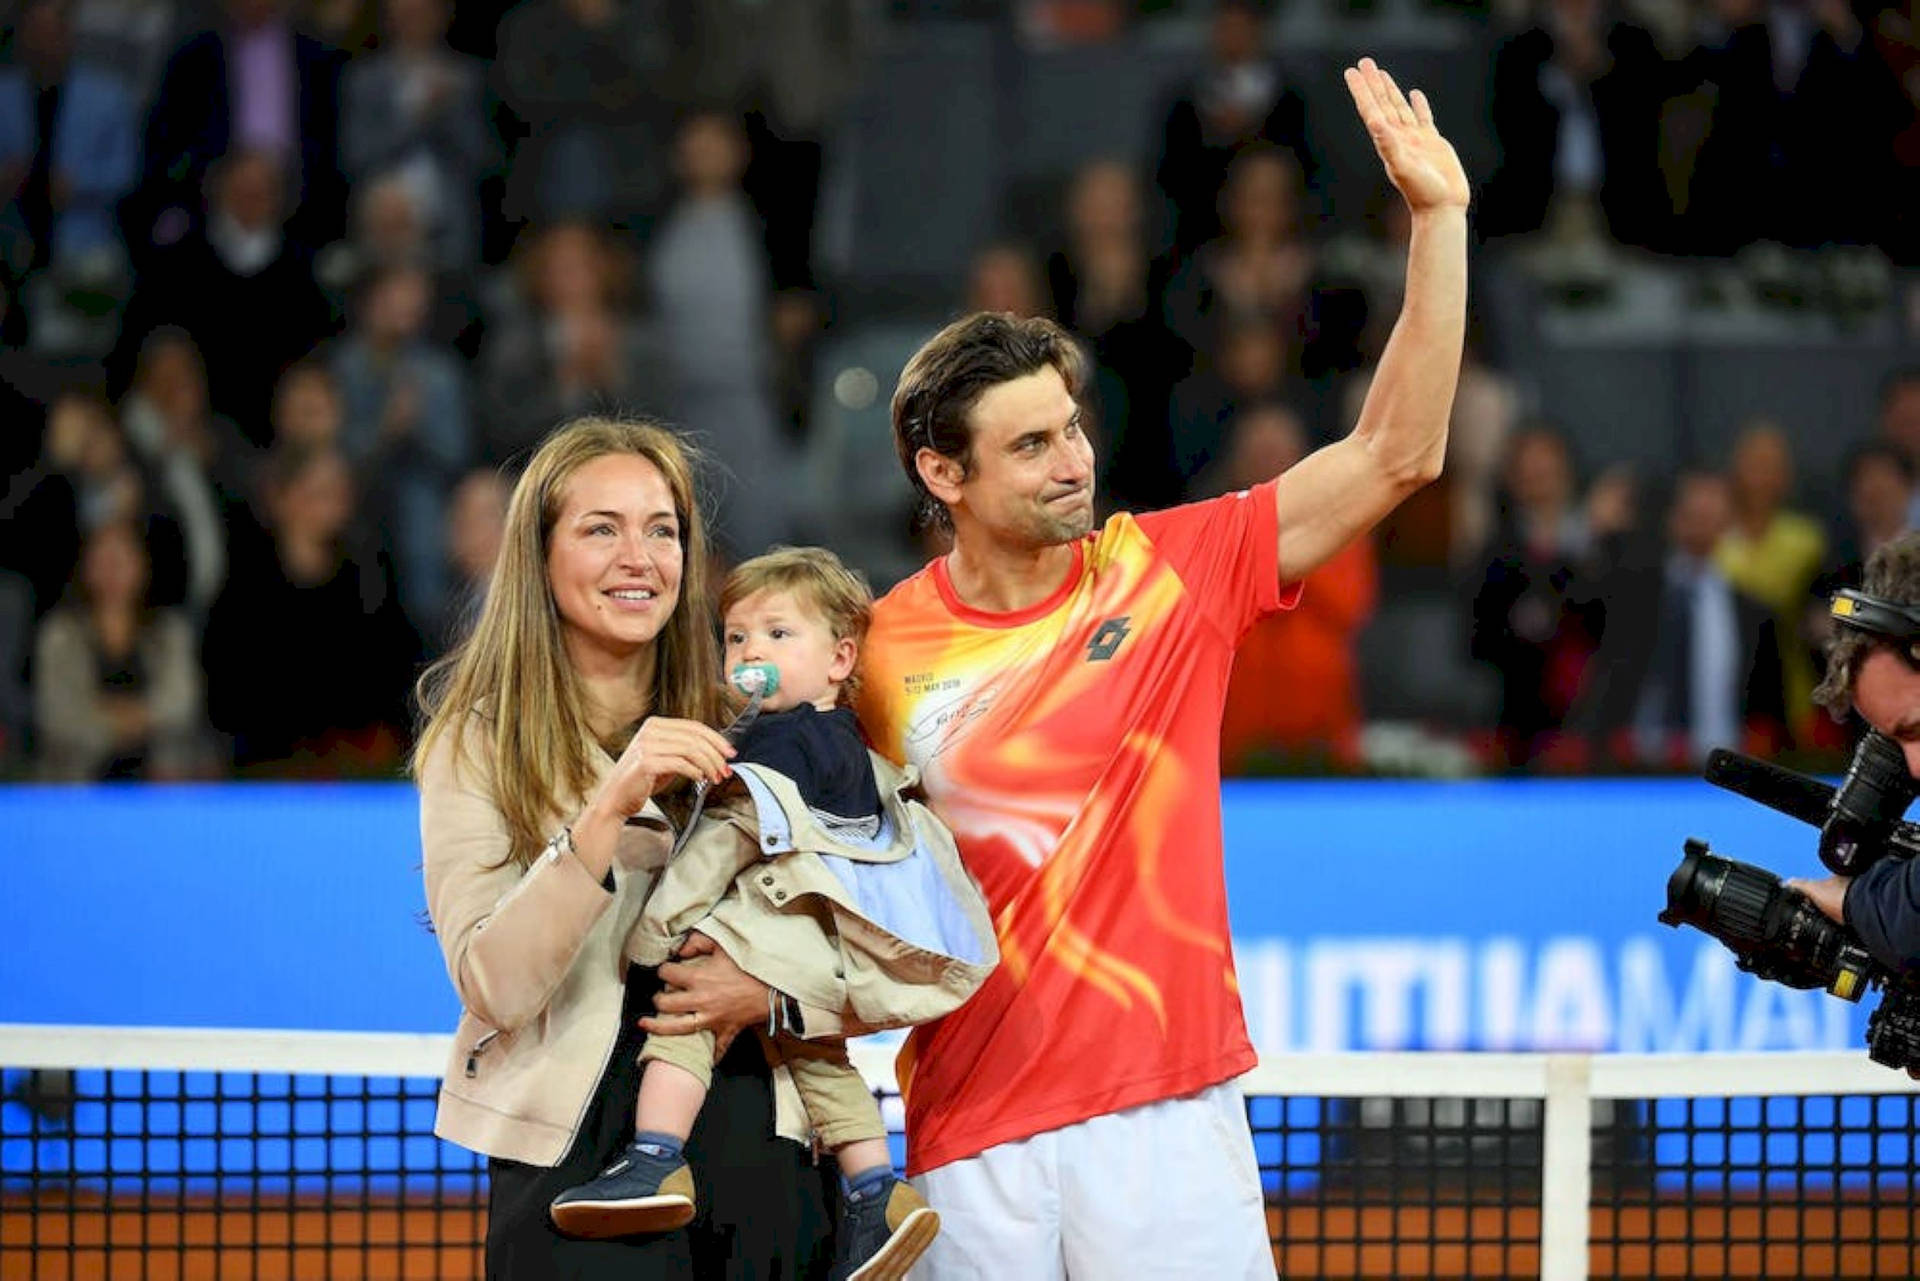 David Ferrer Wife And Child Wallpaper